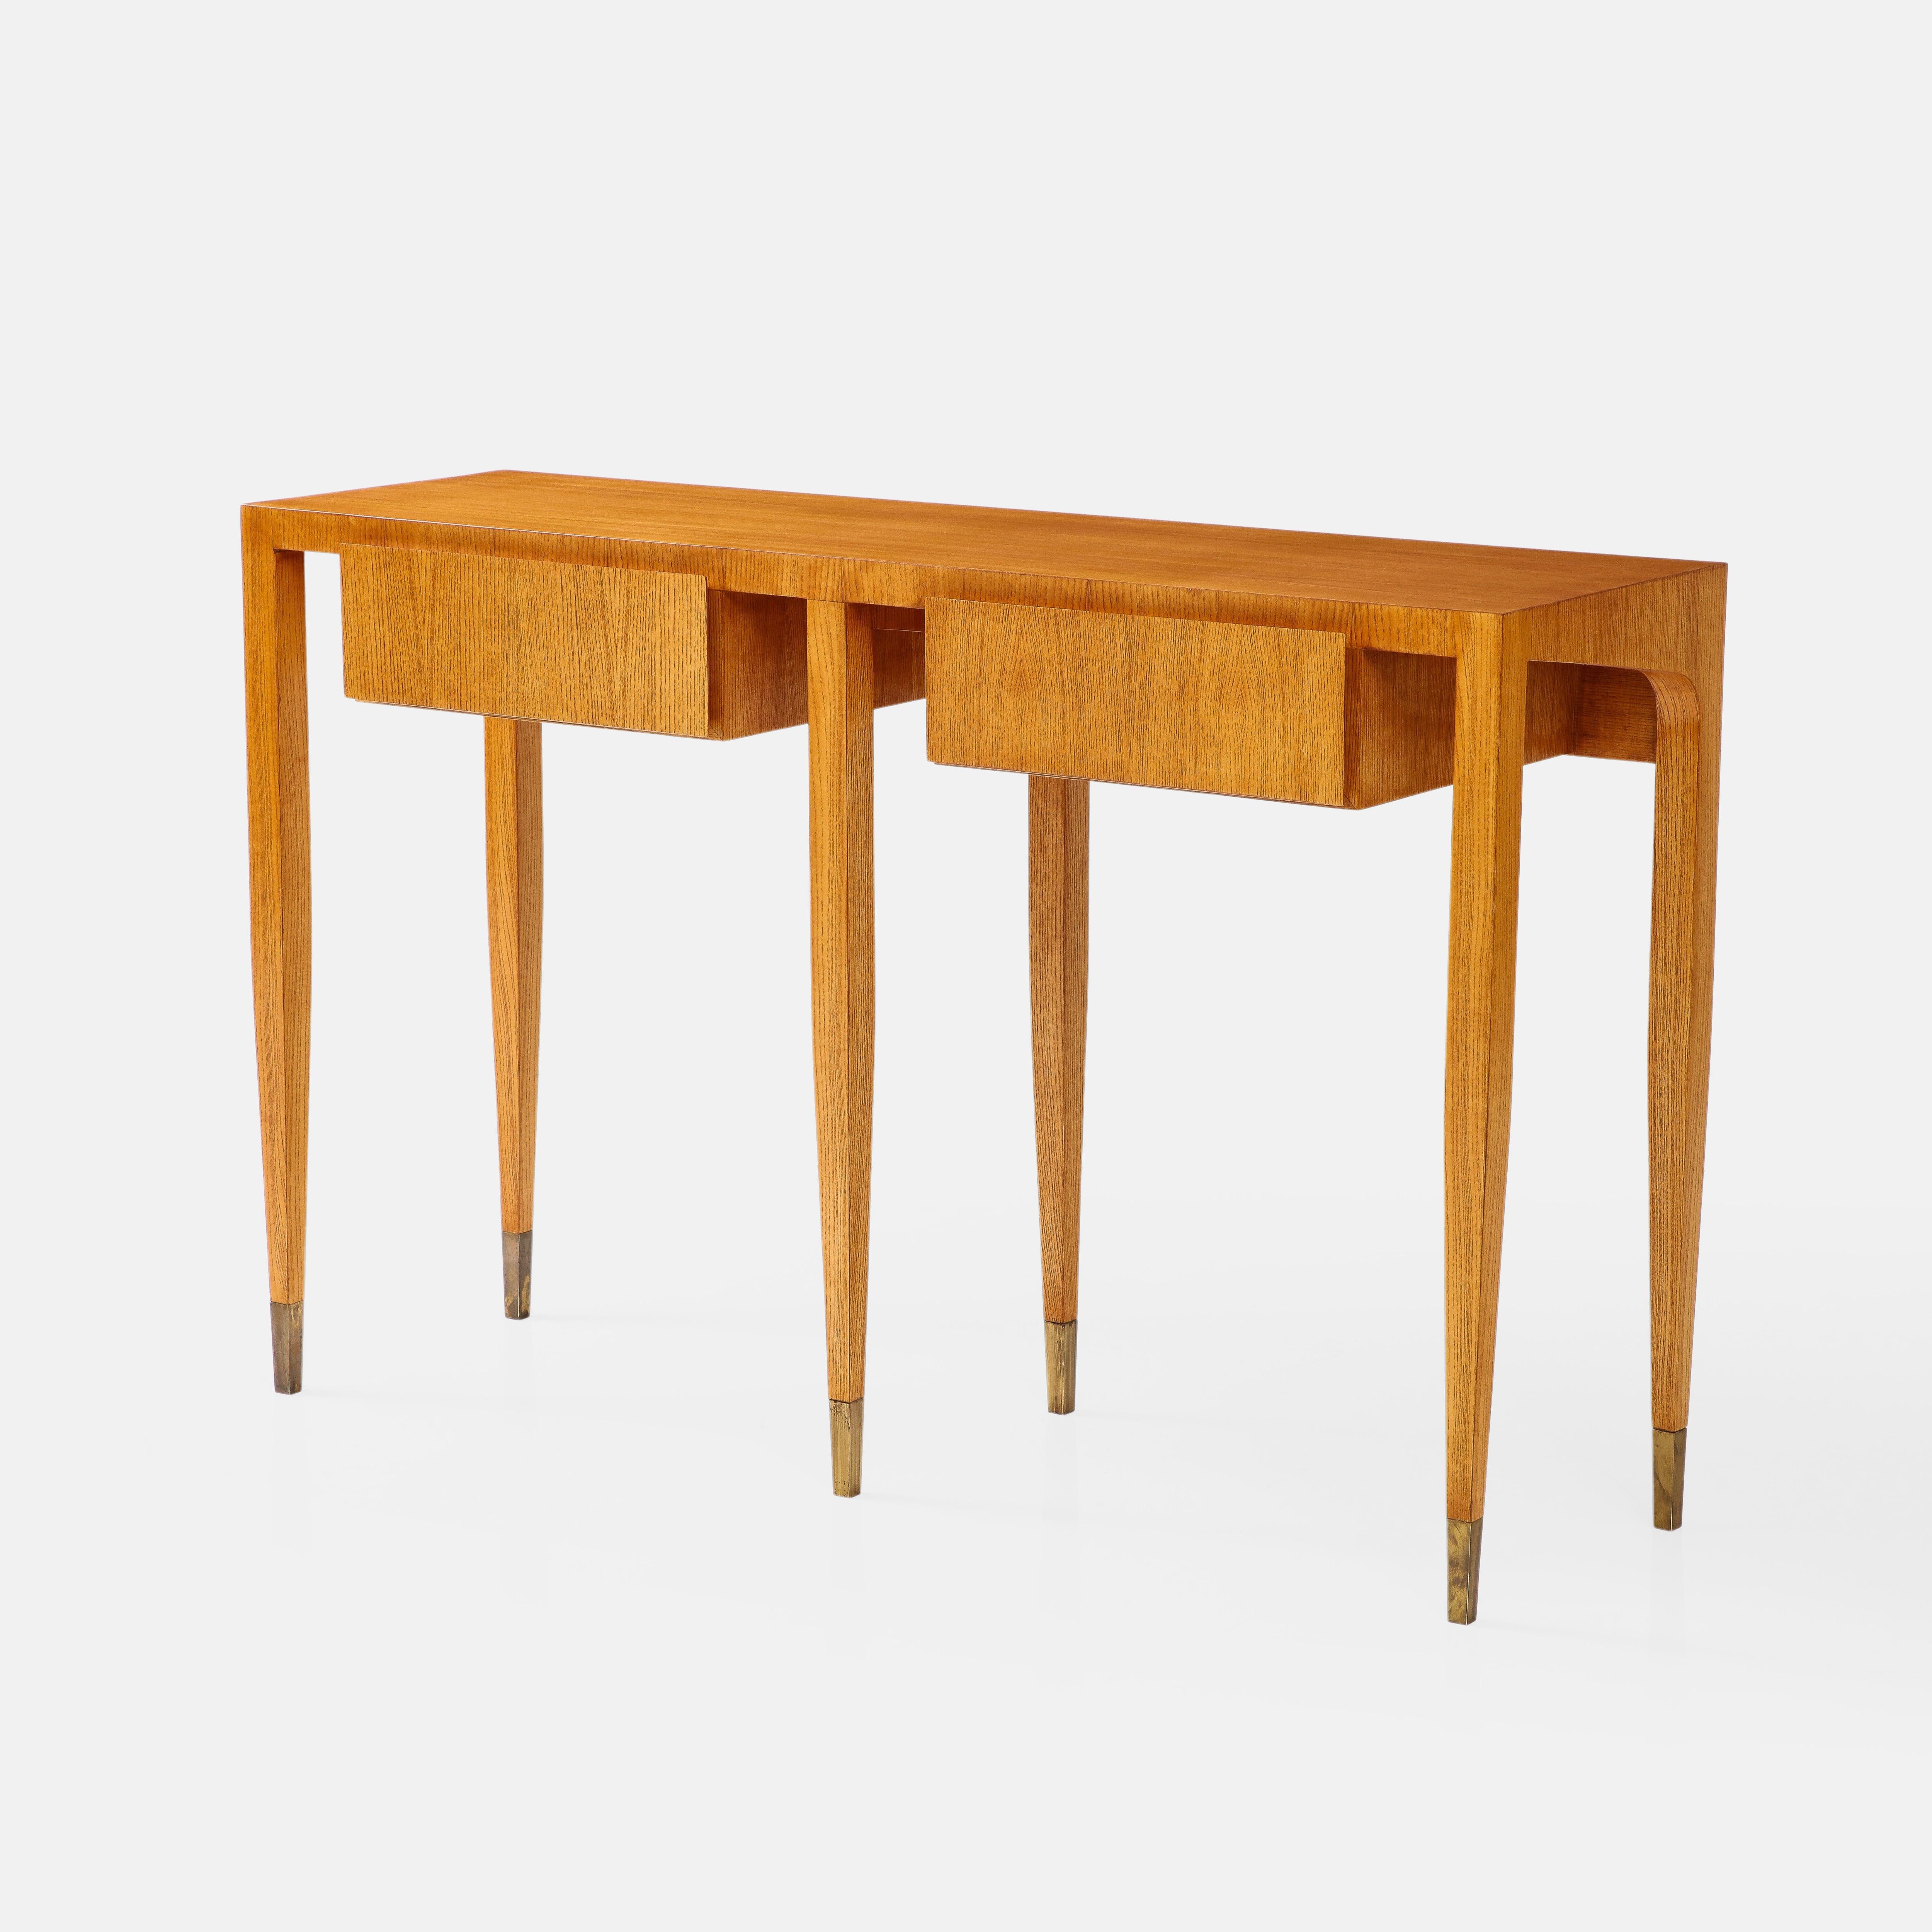 Polished Gio Ponti for Giordano Chiesa Rare Pair of Ash Wood Consoles, Italy, 1950s For Sale